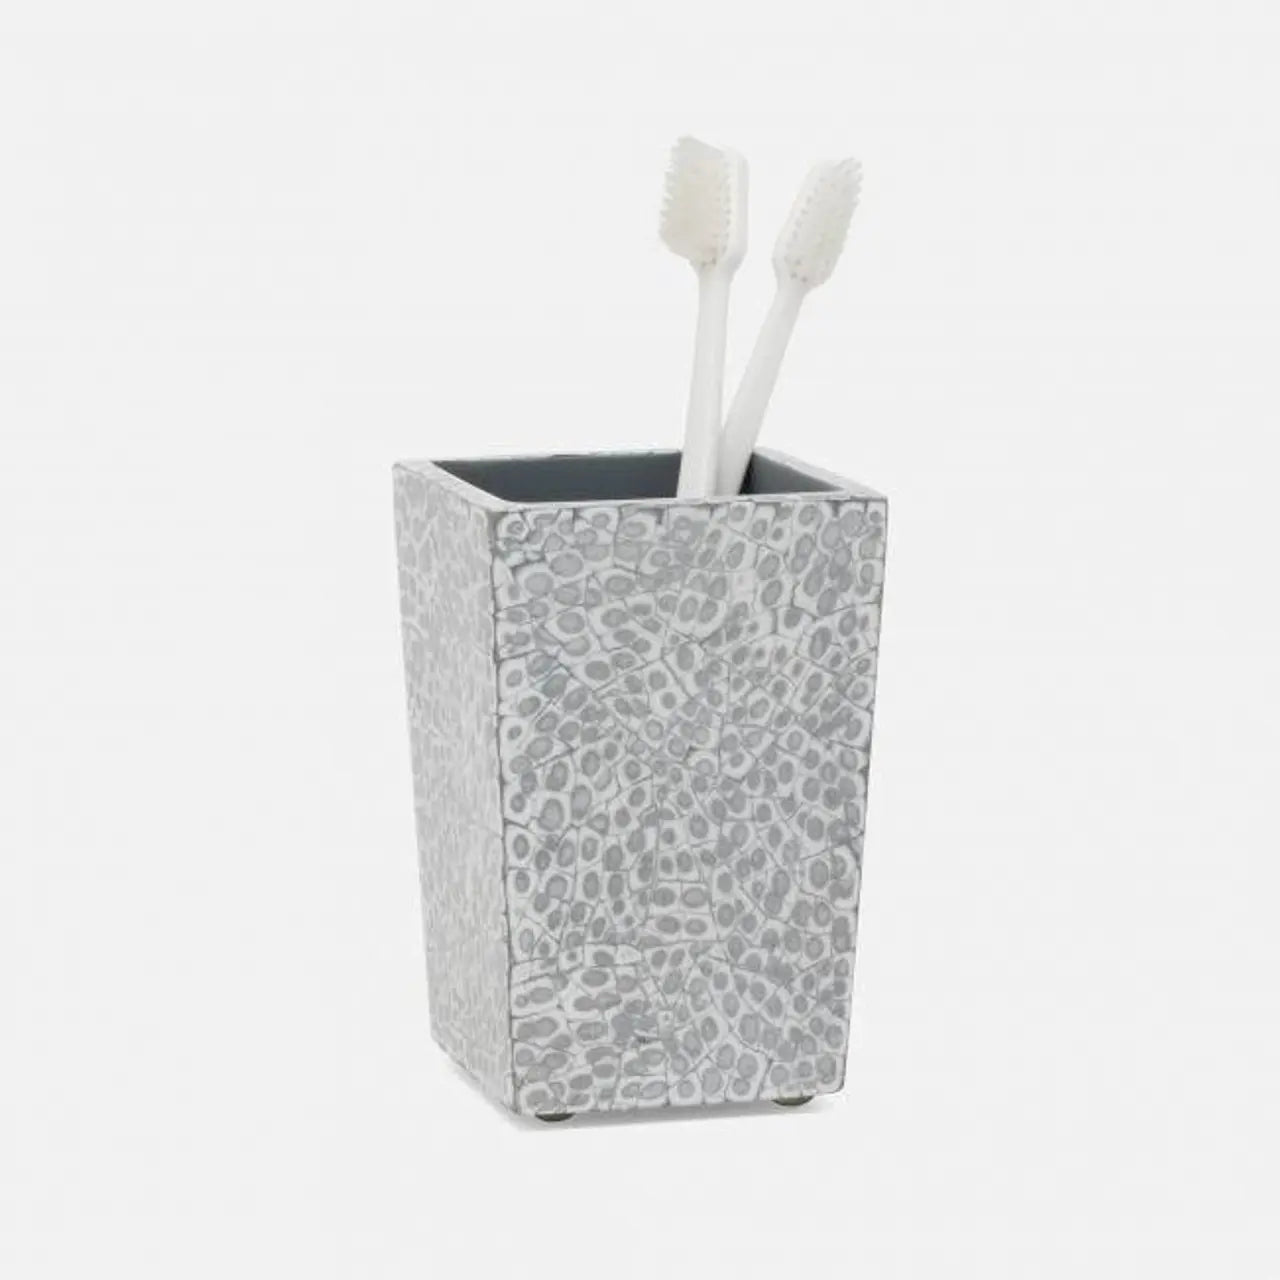 Pigeon and Poodle Callas Toothbrush Holder in Silver White Lacquered Eggshell